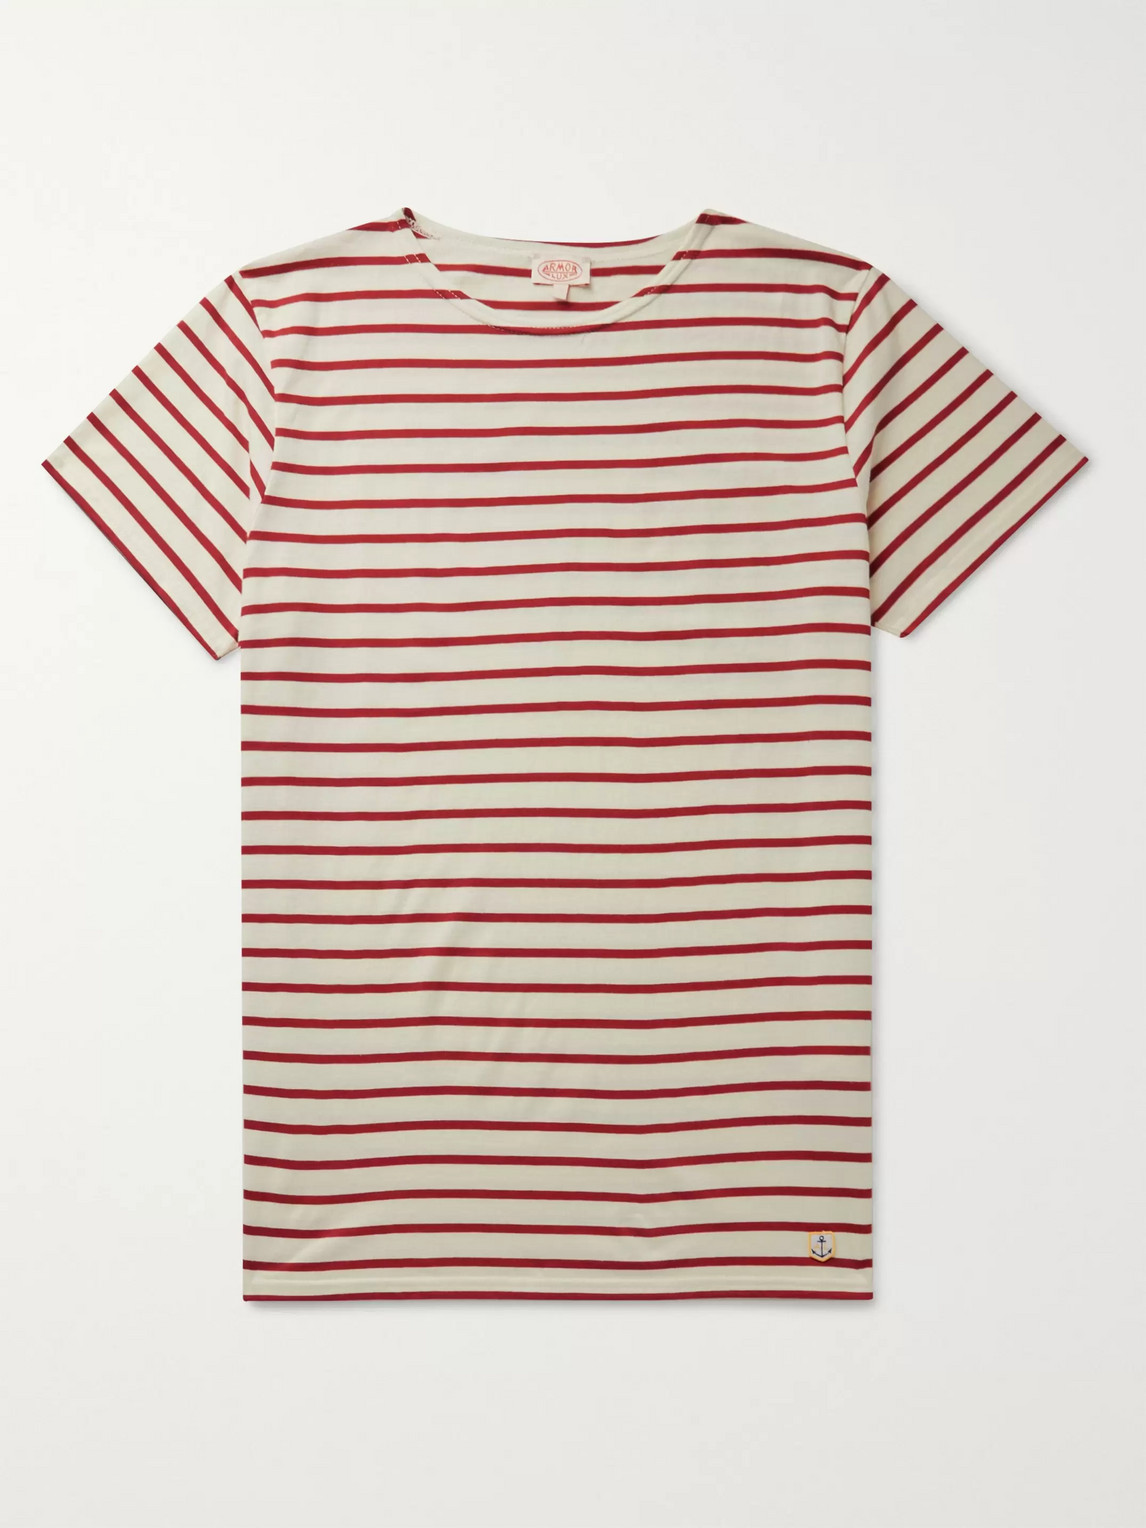 Armor-lux Striped Cotton-jersey T-shirt In Red